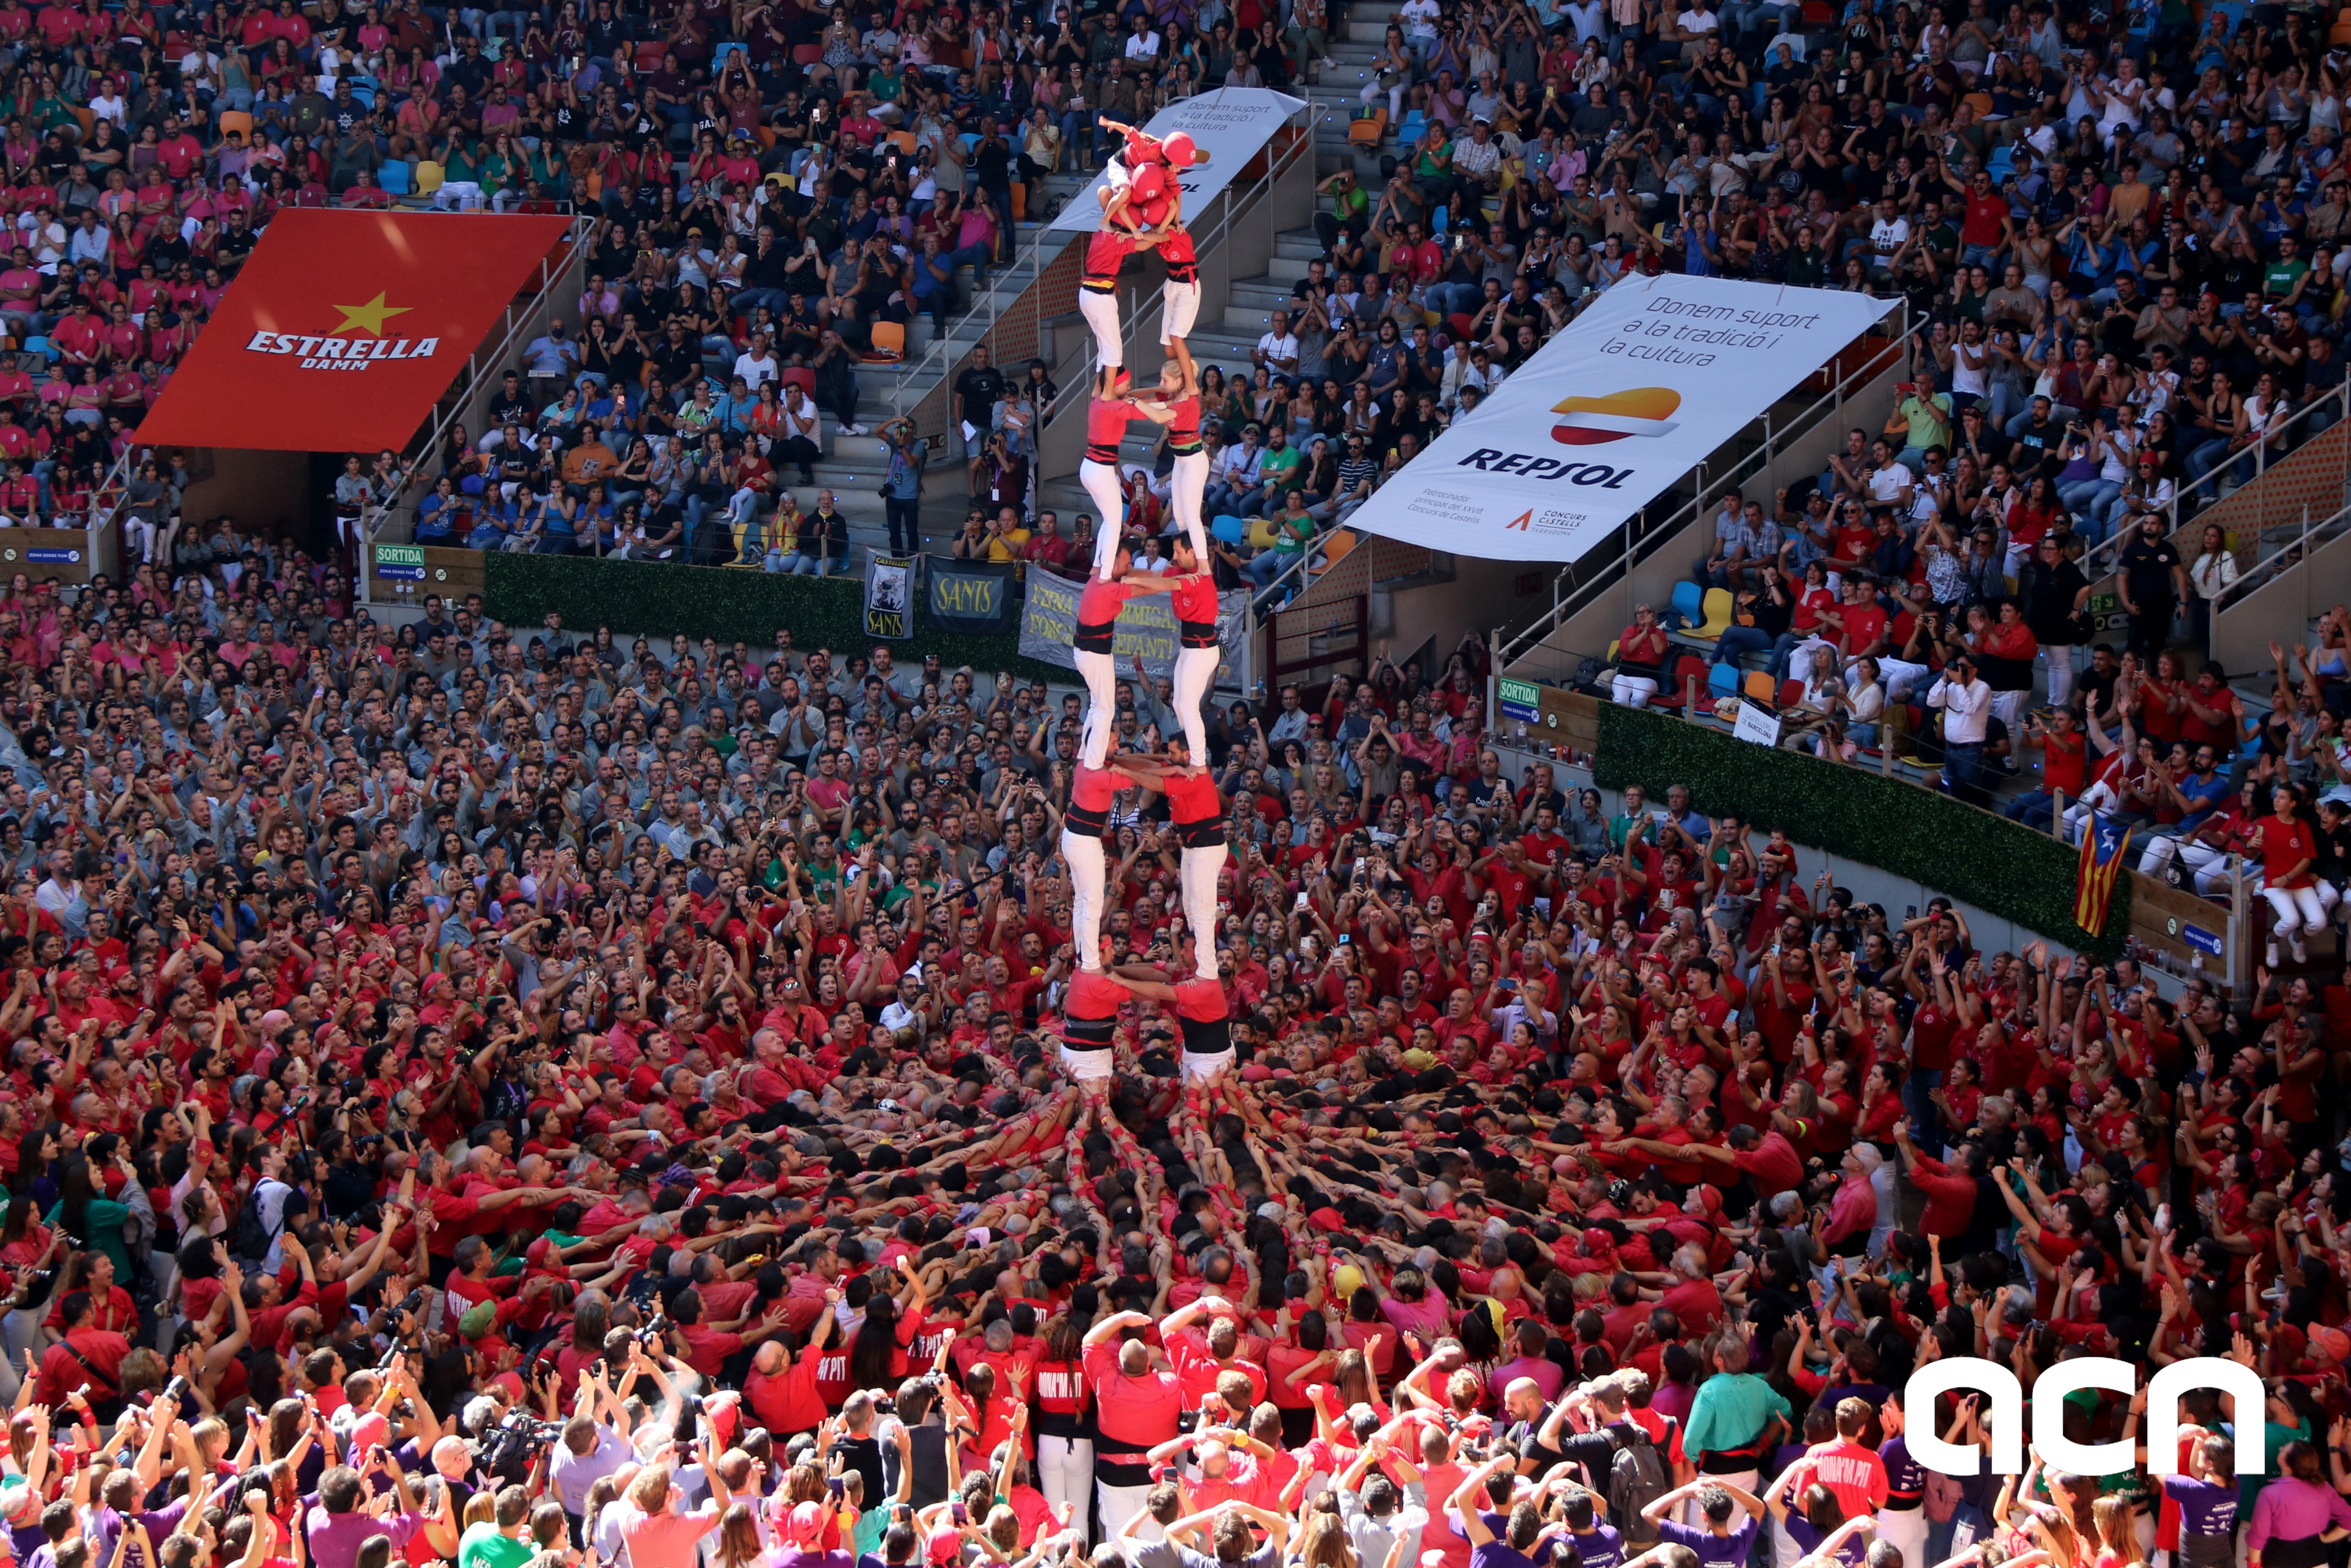 Eight-storey human tower with two people per tier by Colla Joves Xiquets de Valls